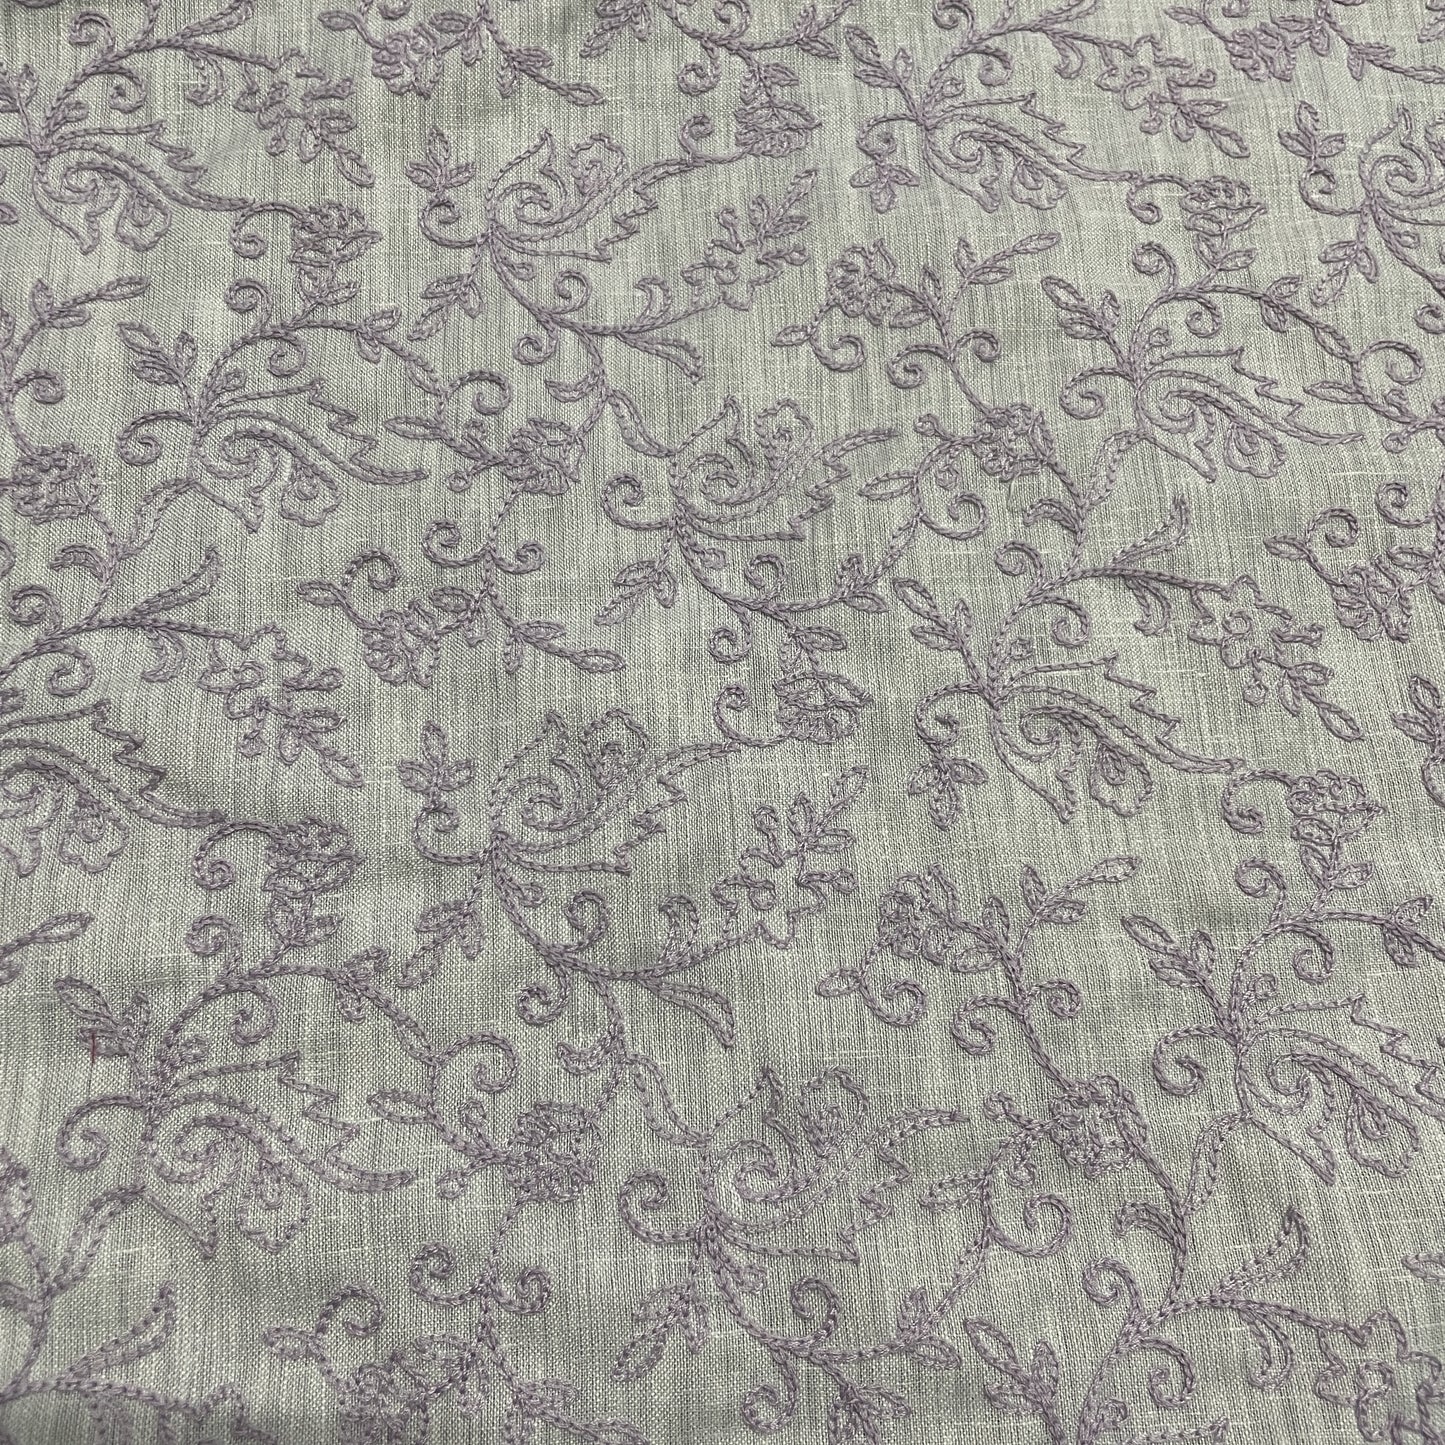 Light Lavender Floral Thread Embroidery Linen Fabric